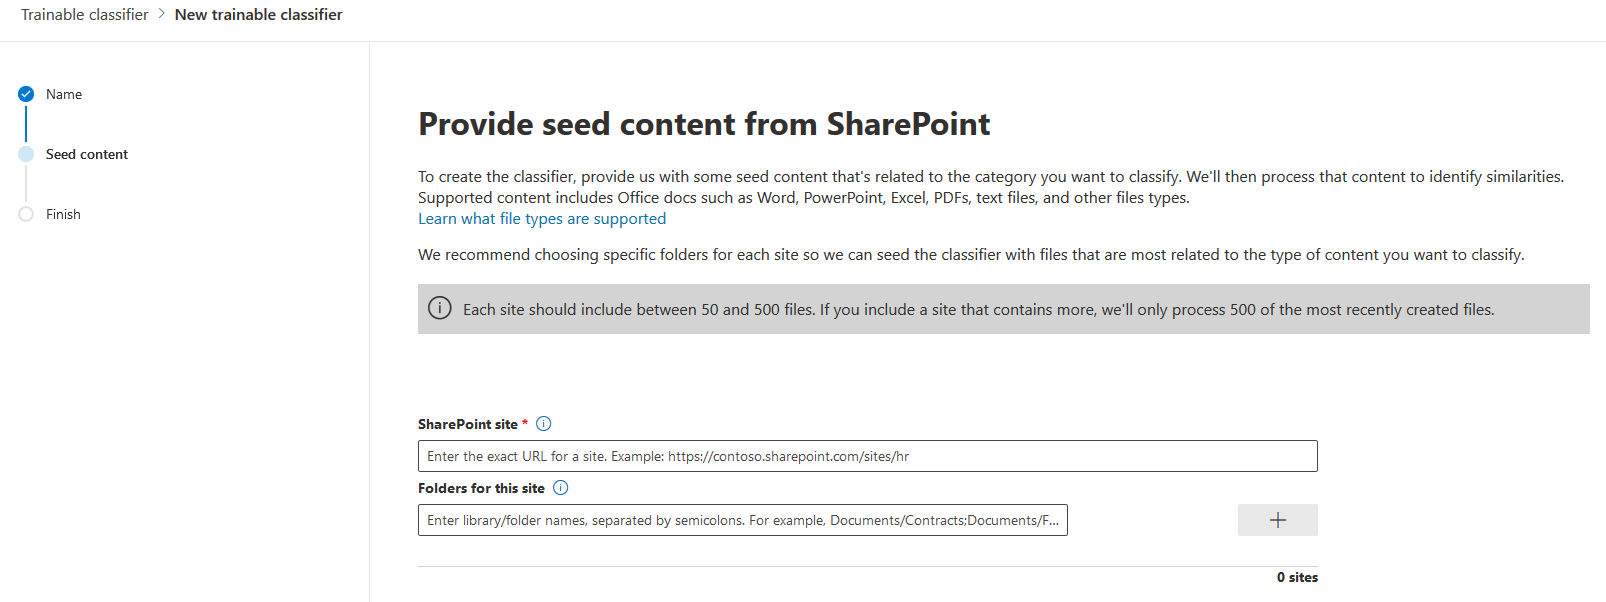 Screenshot shows Provide seed content from SharePoint screen.